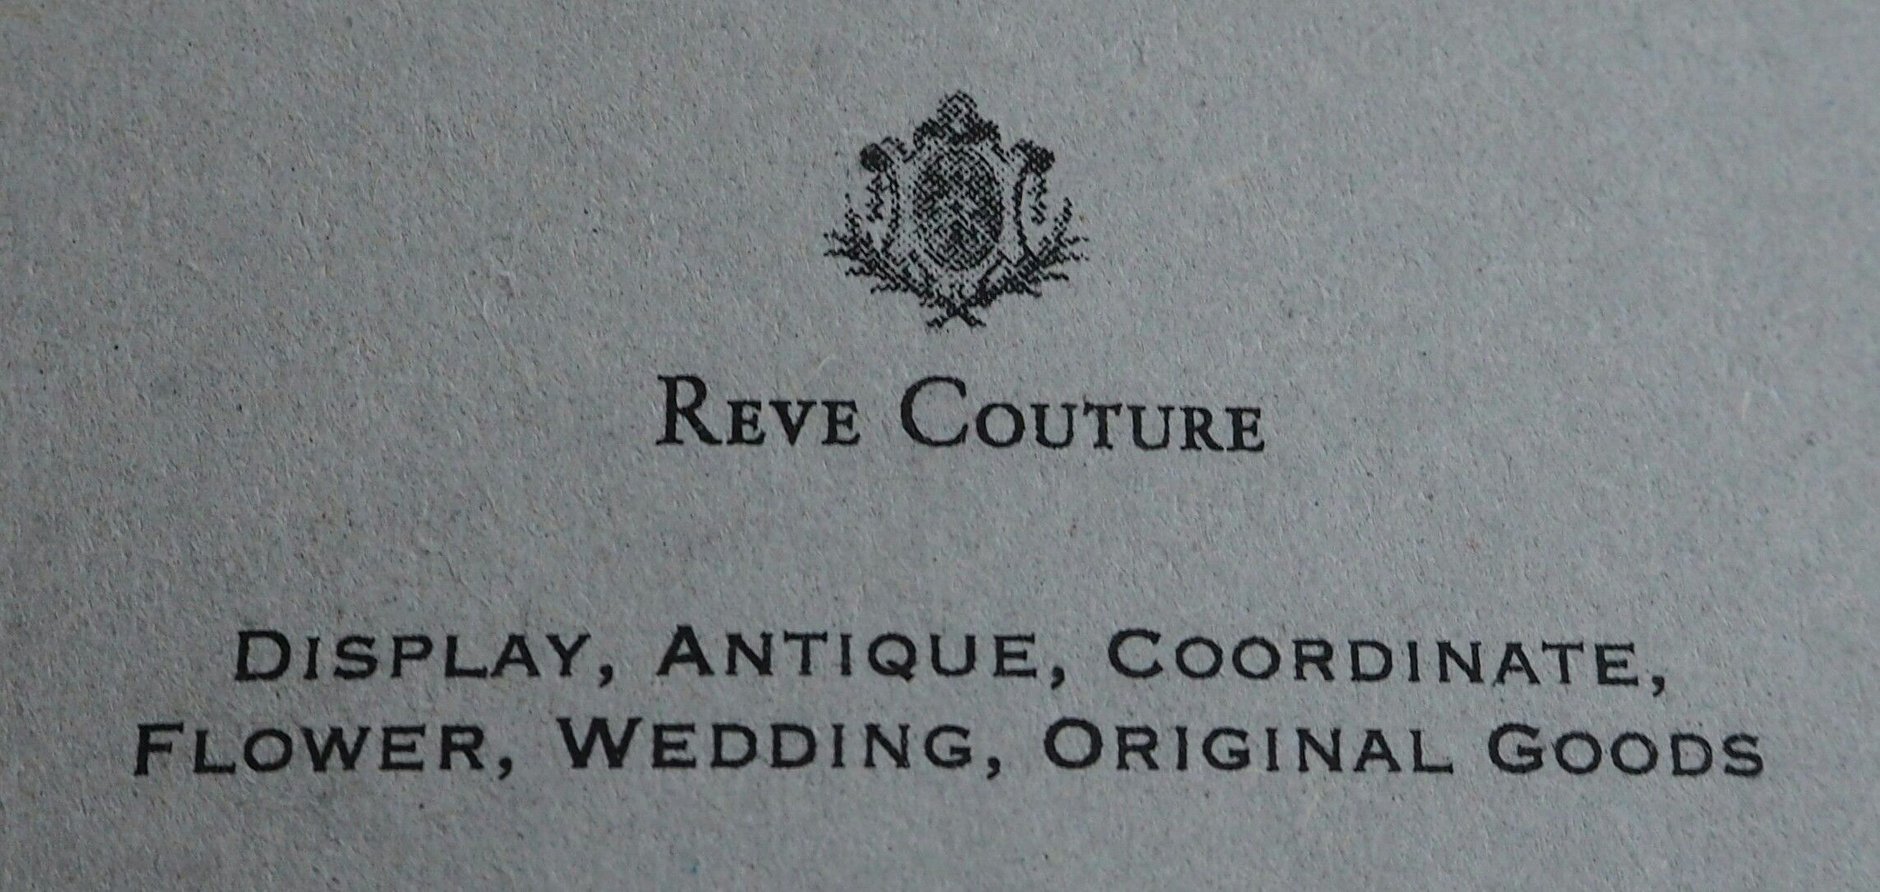 Reve Couture